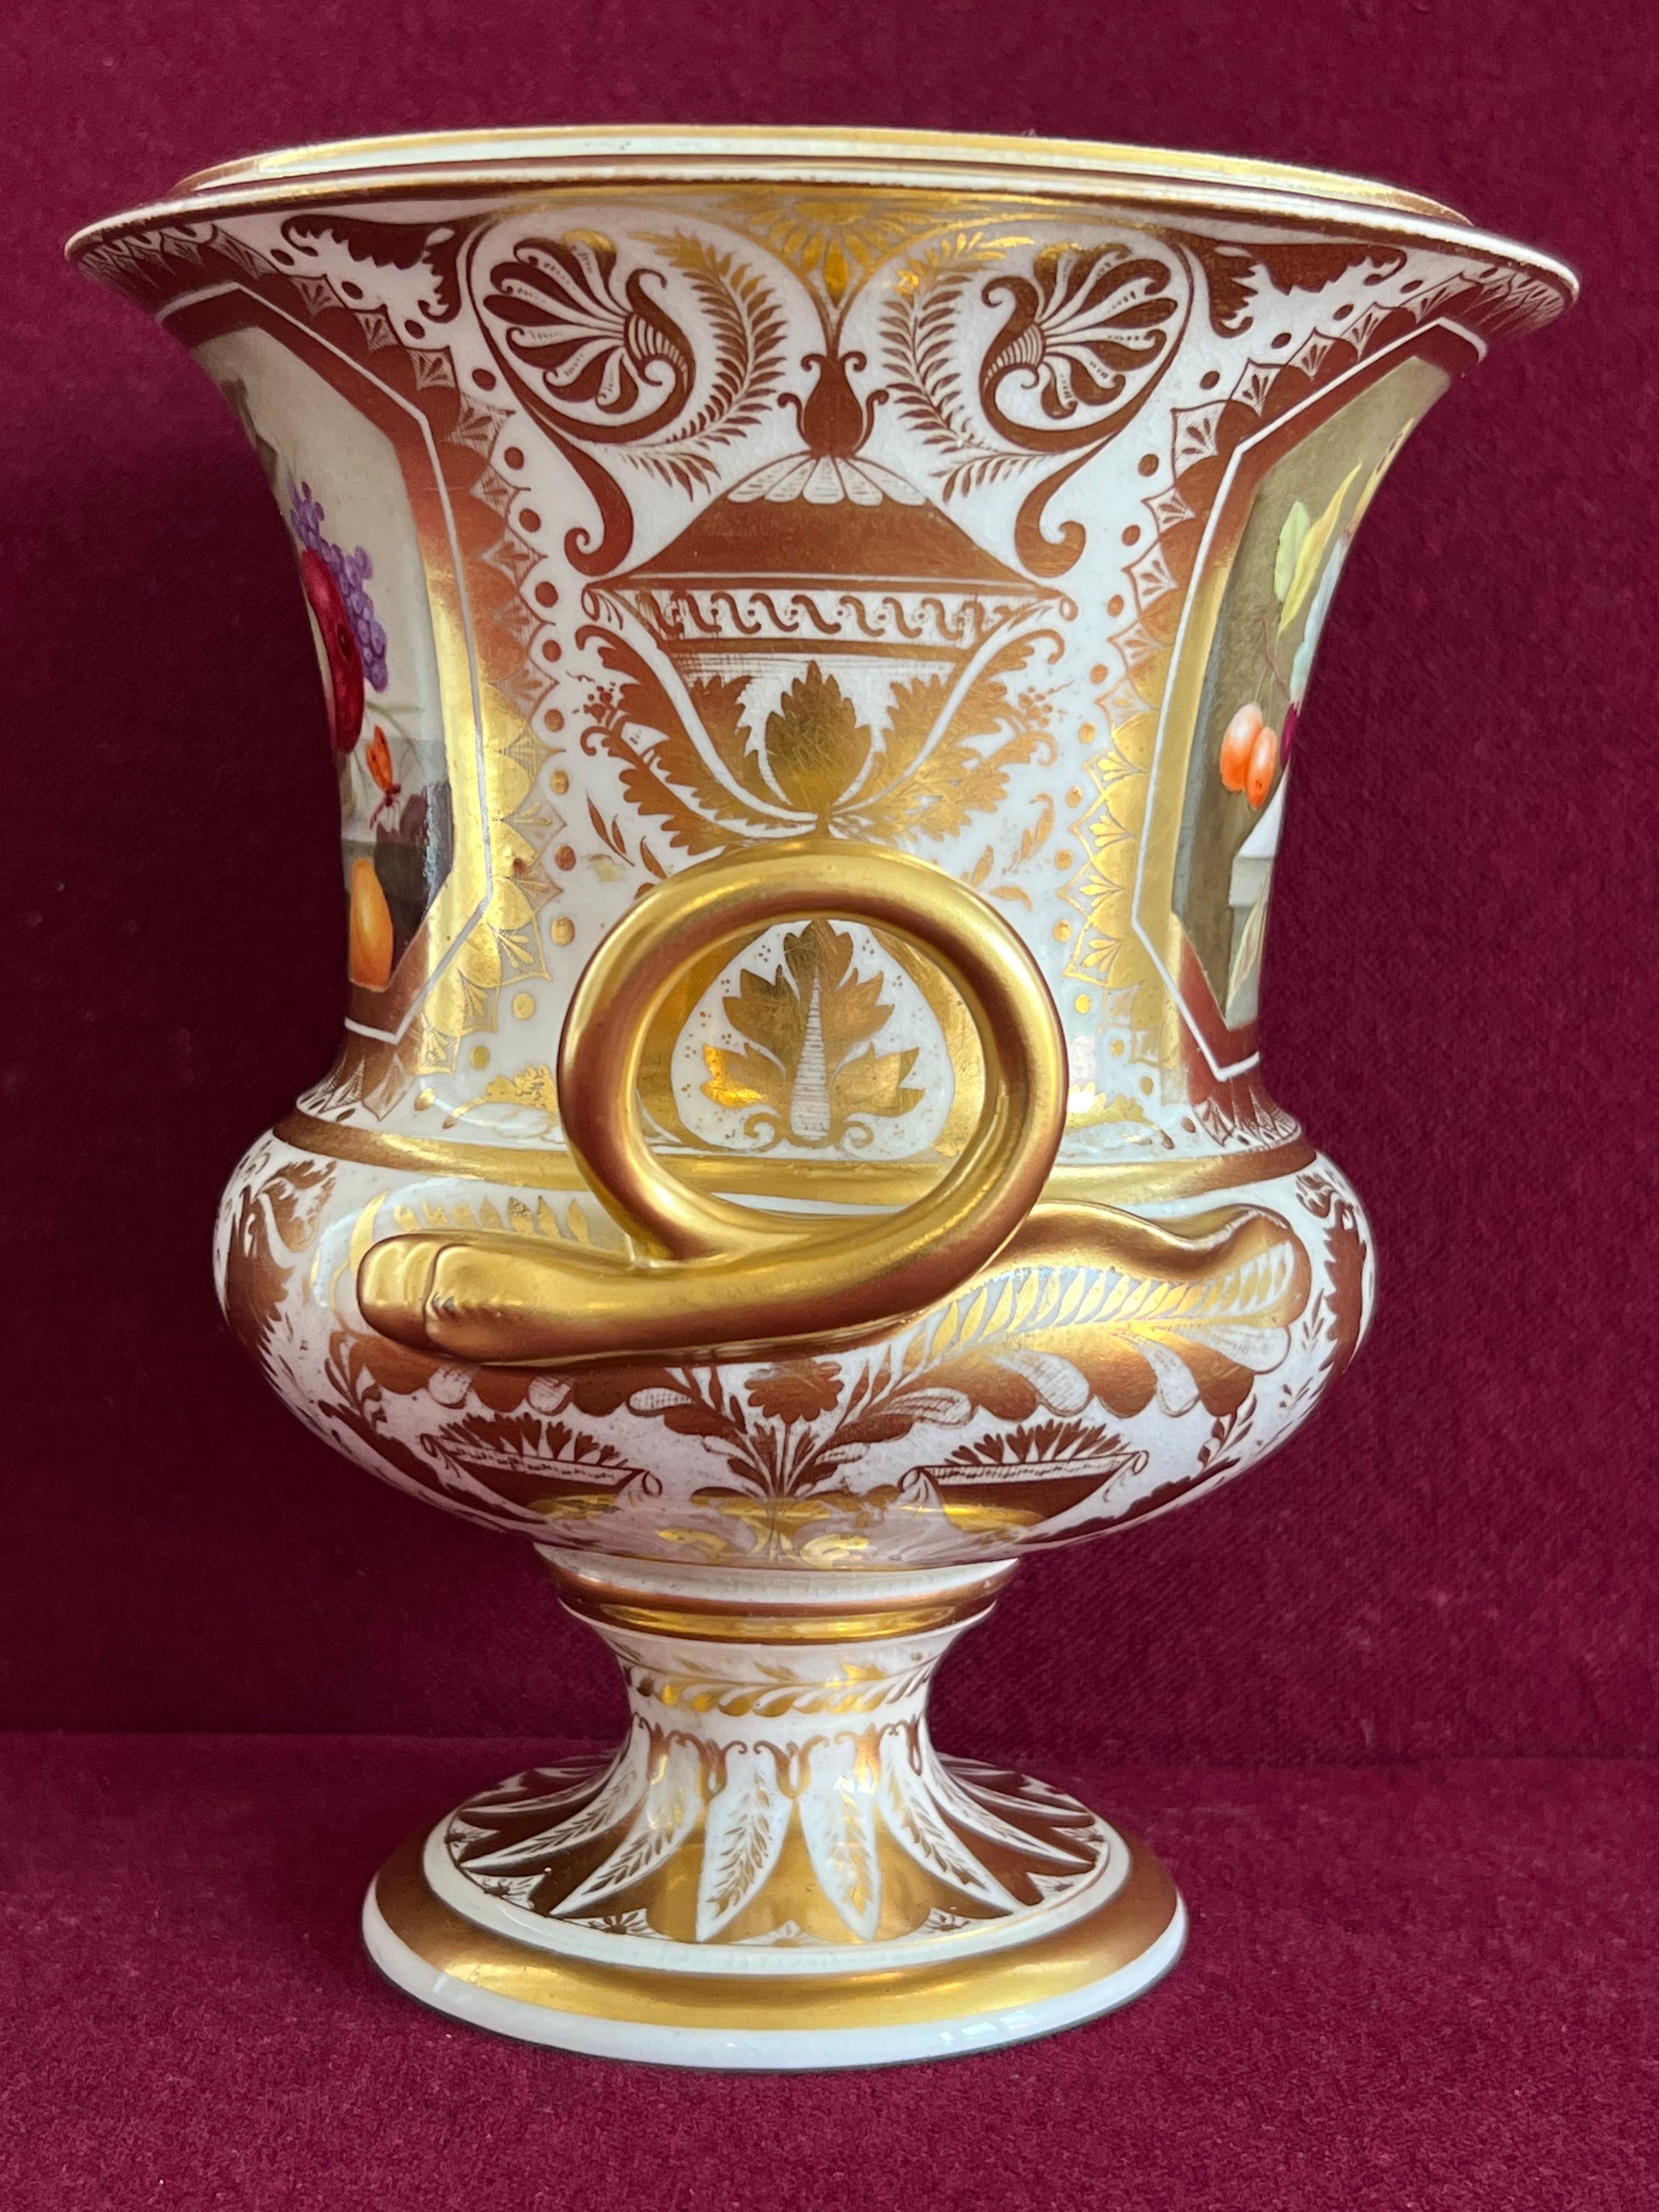 Hand-Painted Fine Derby Porcelain Vase C.1815 Decorated in the Manner of Thomas Steele For Sale